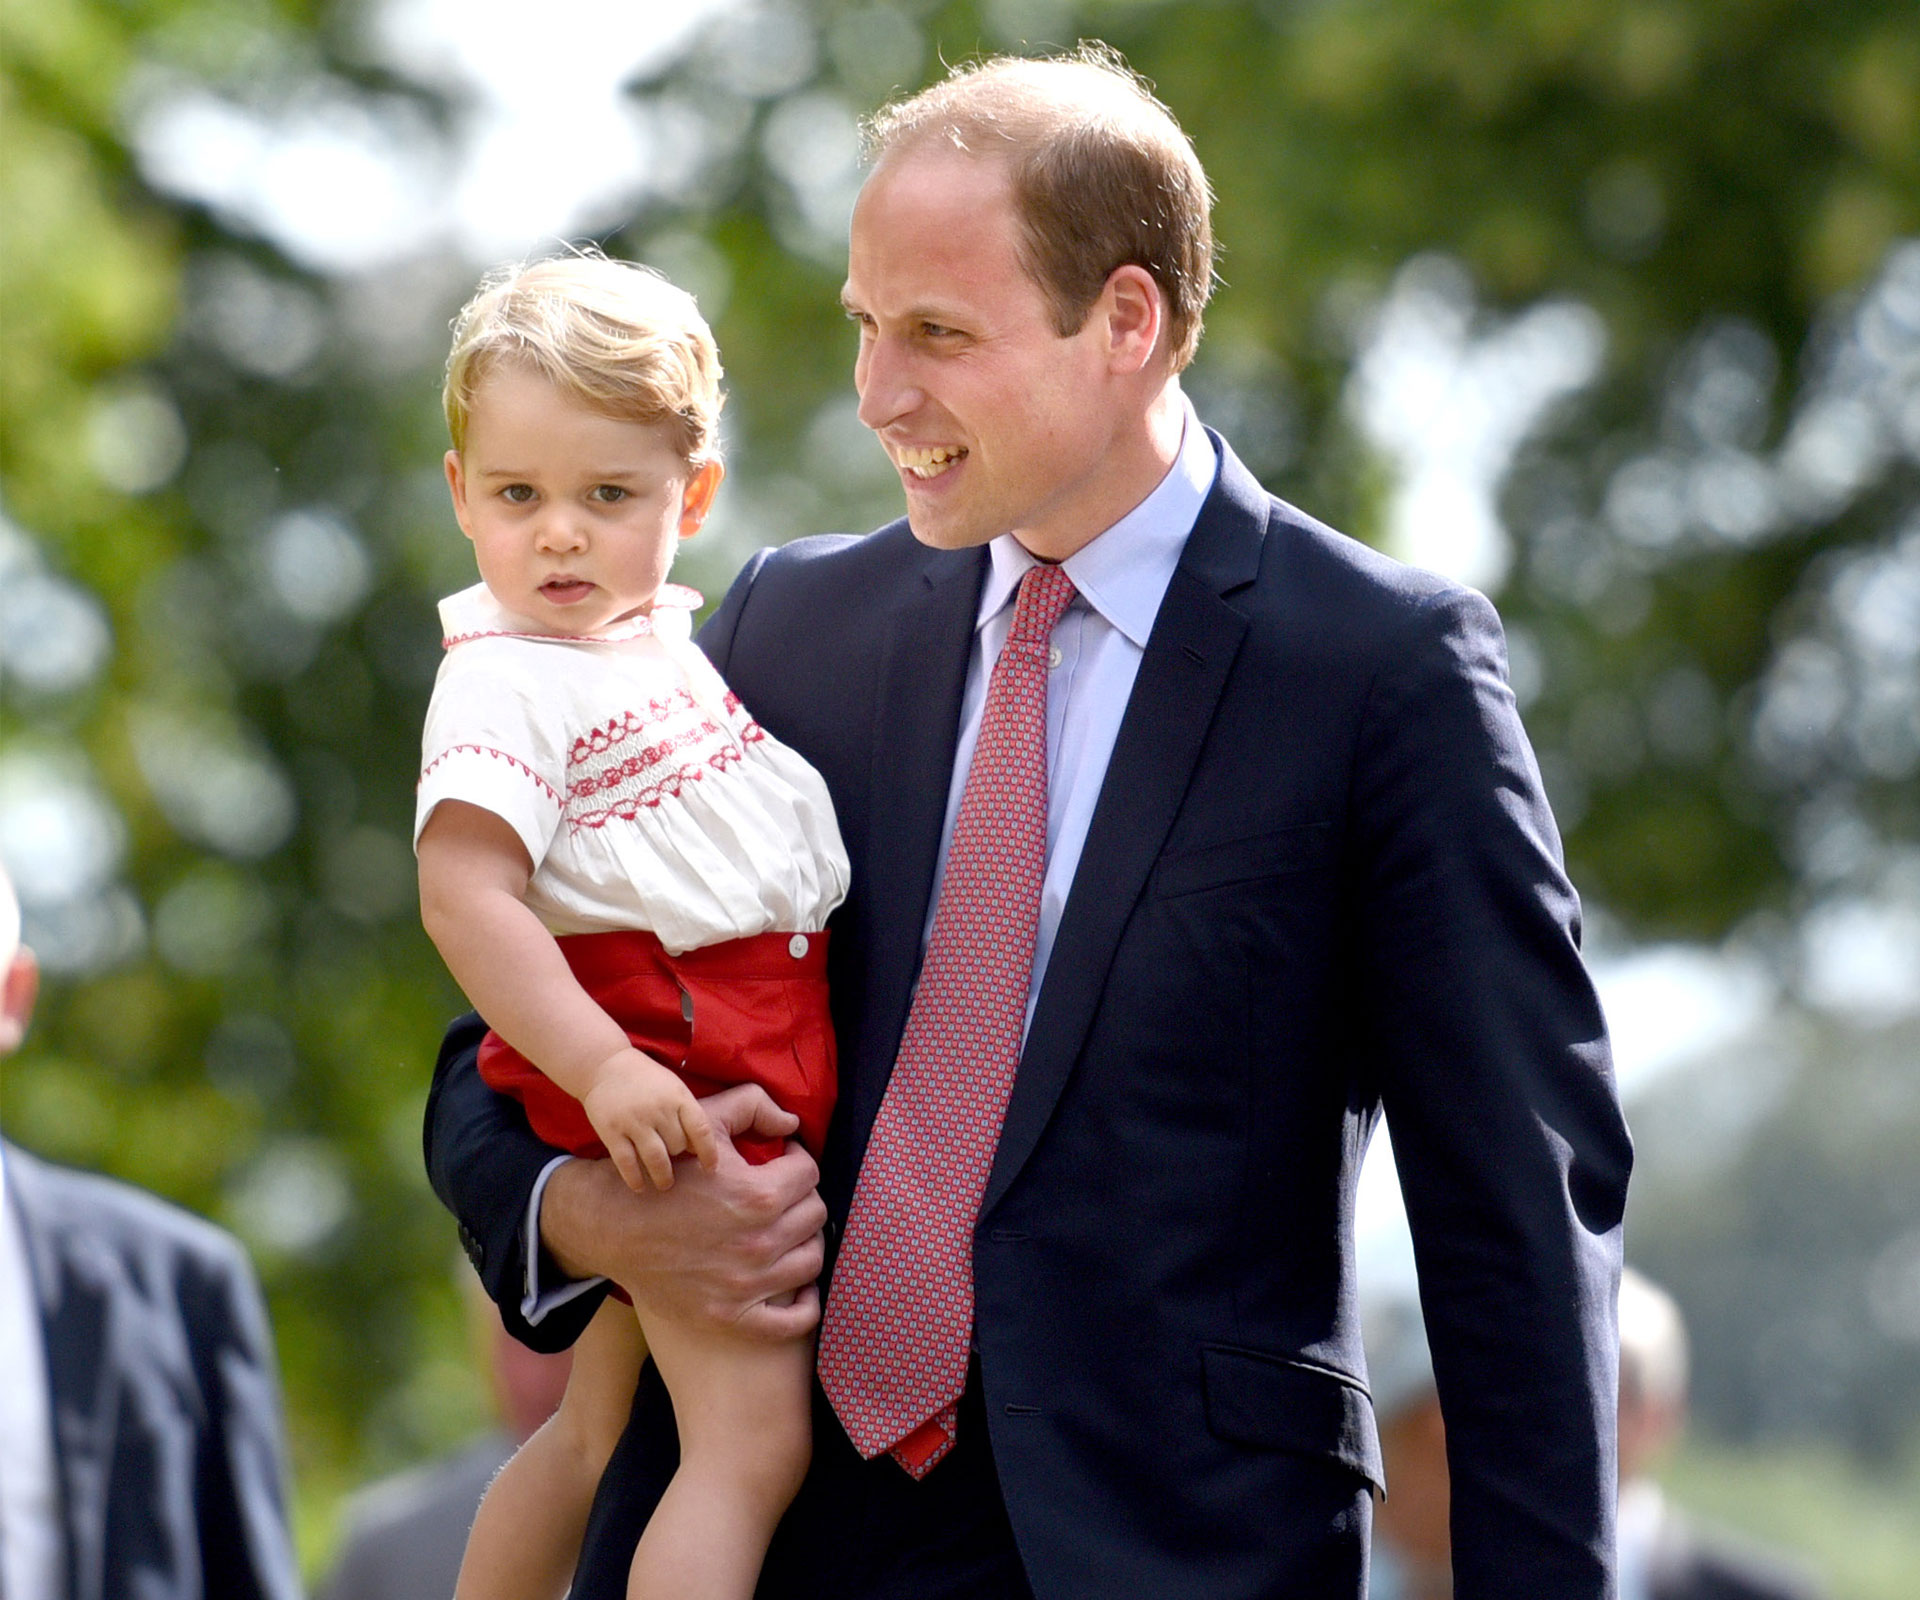 In a rare interview, Prince Williams talks about how family life has changed since Princess Charlotte’s birth.